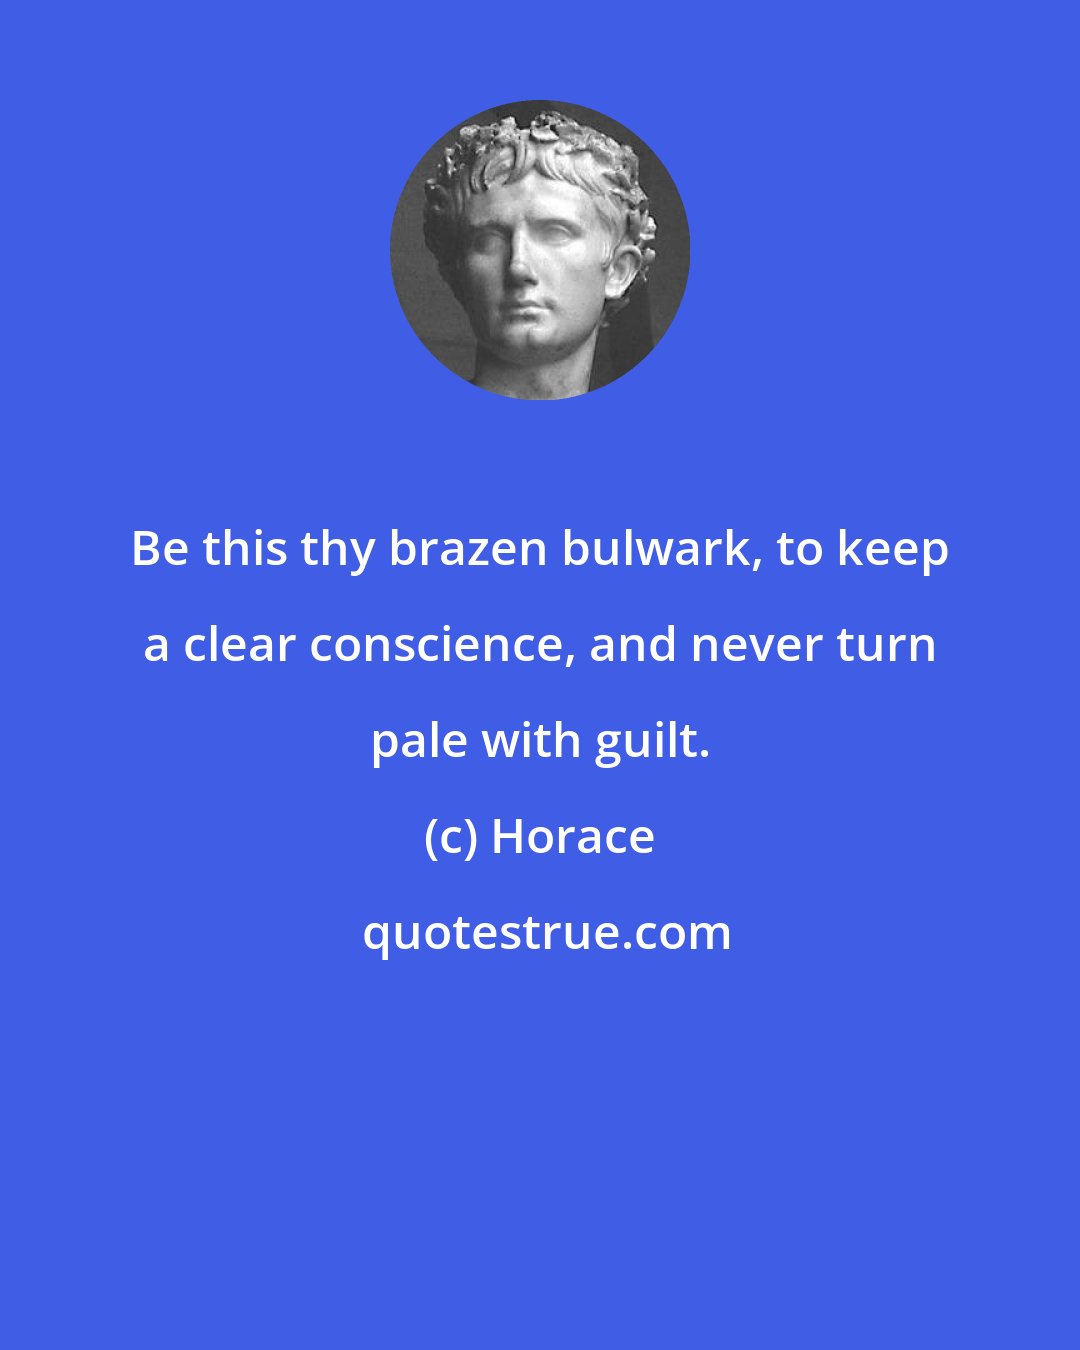 Horace: Be this thy brazen bulwark, to keep a clear conscience, and never turn pale with guilt.